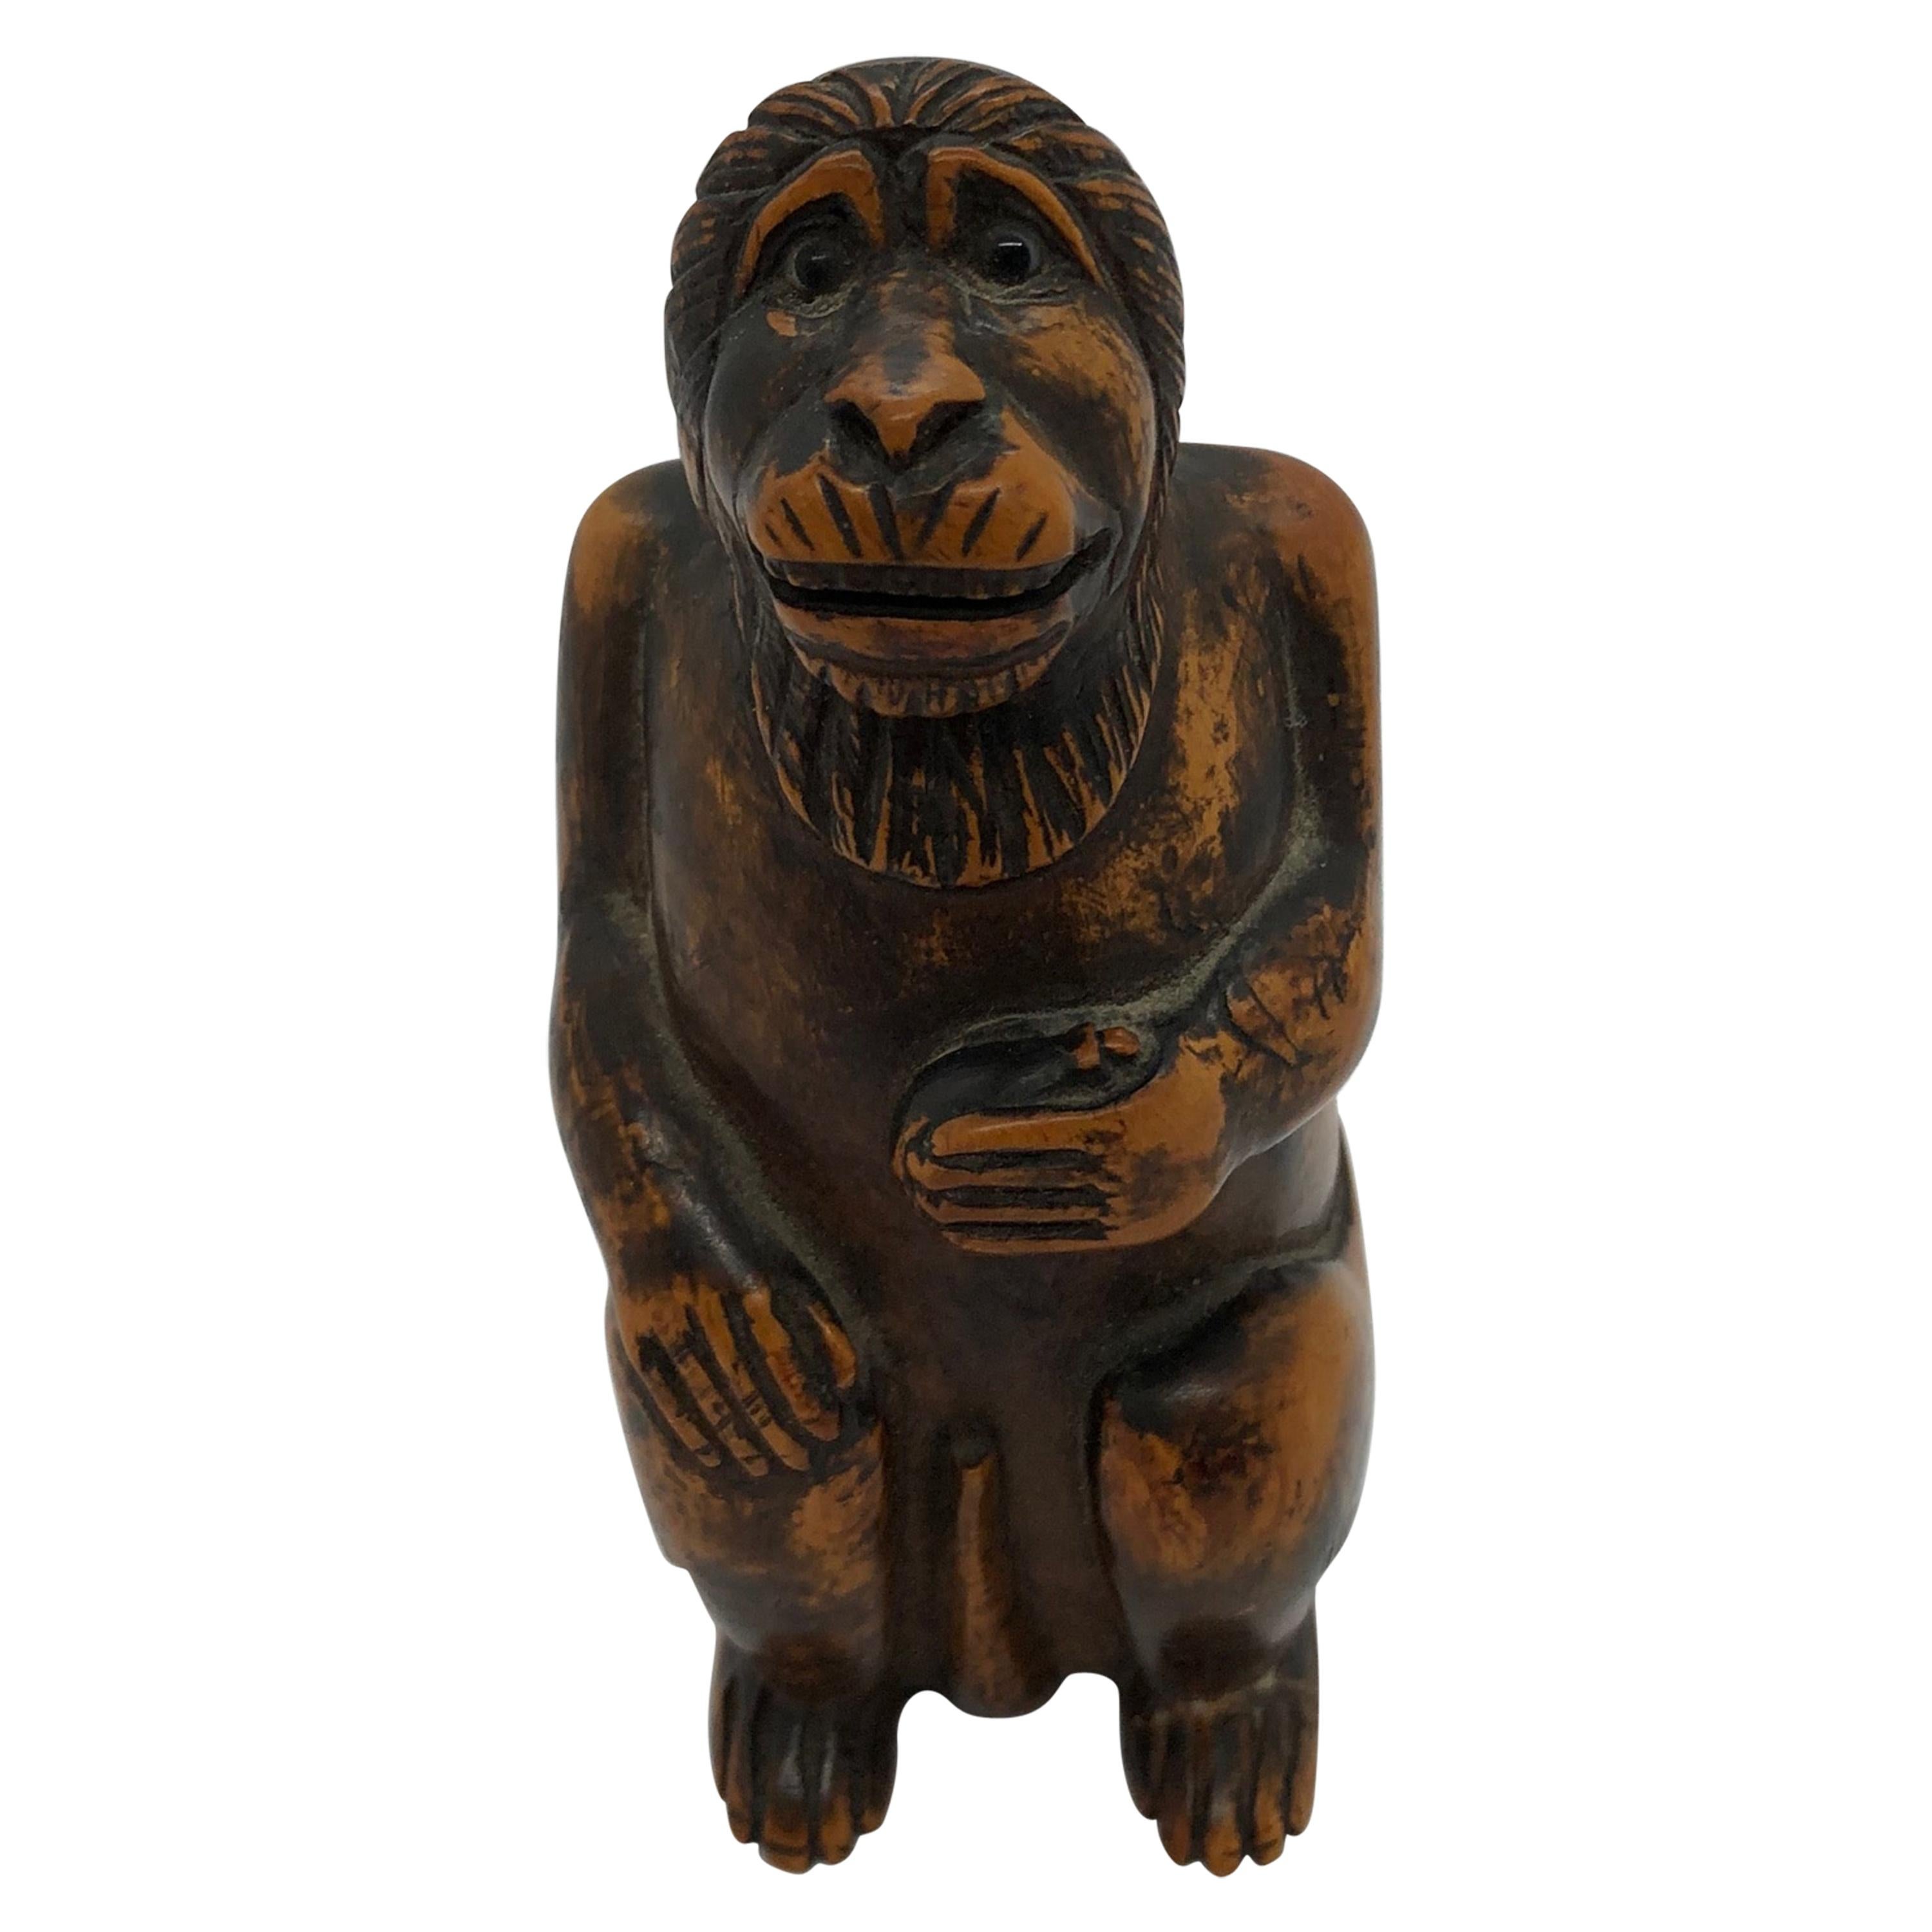 Box in the Shape of a Monkey, 19th Century